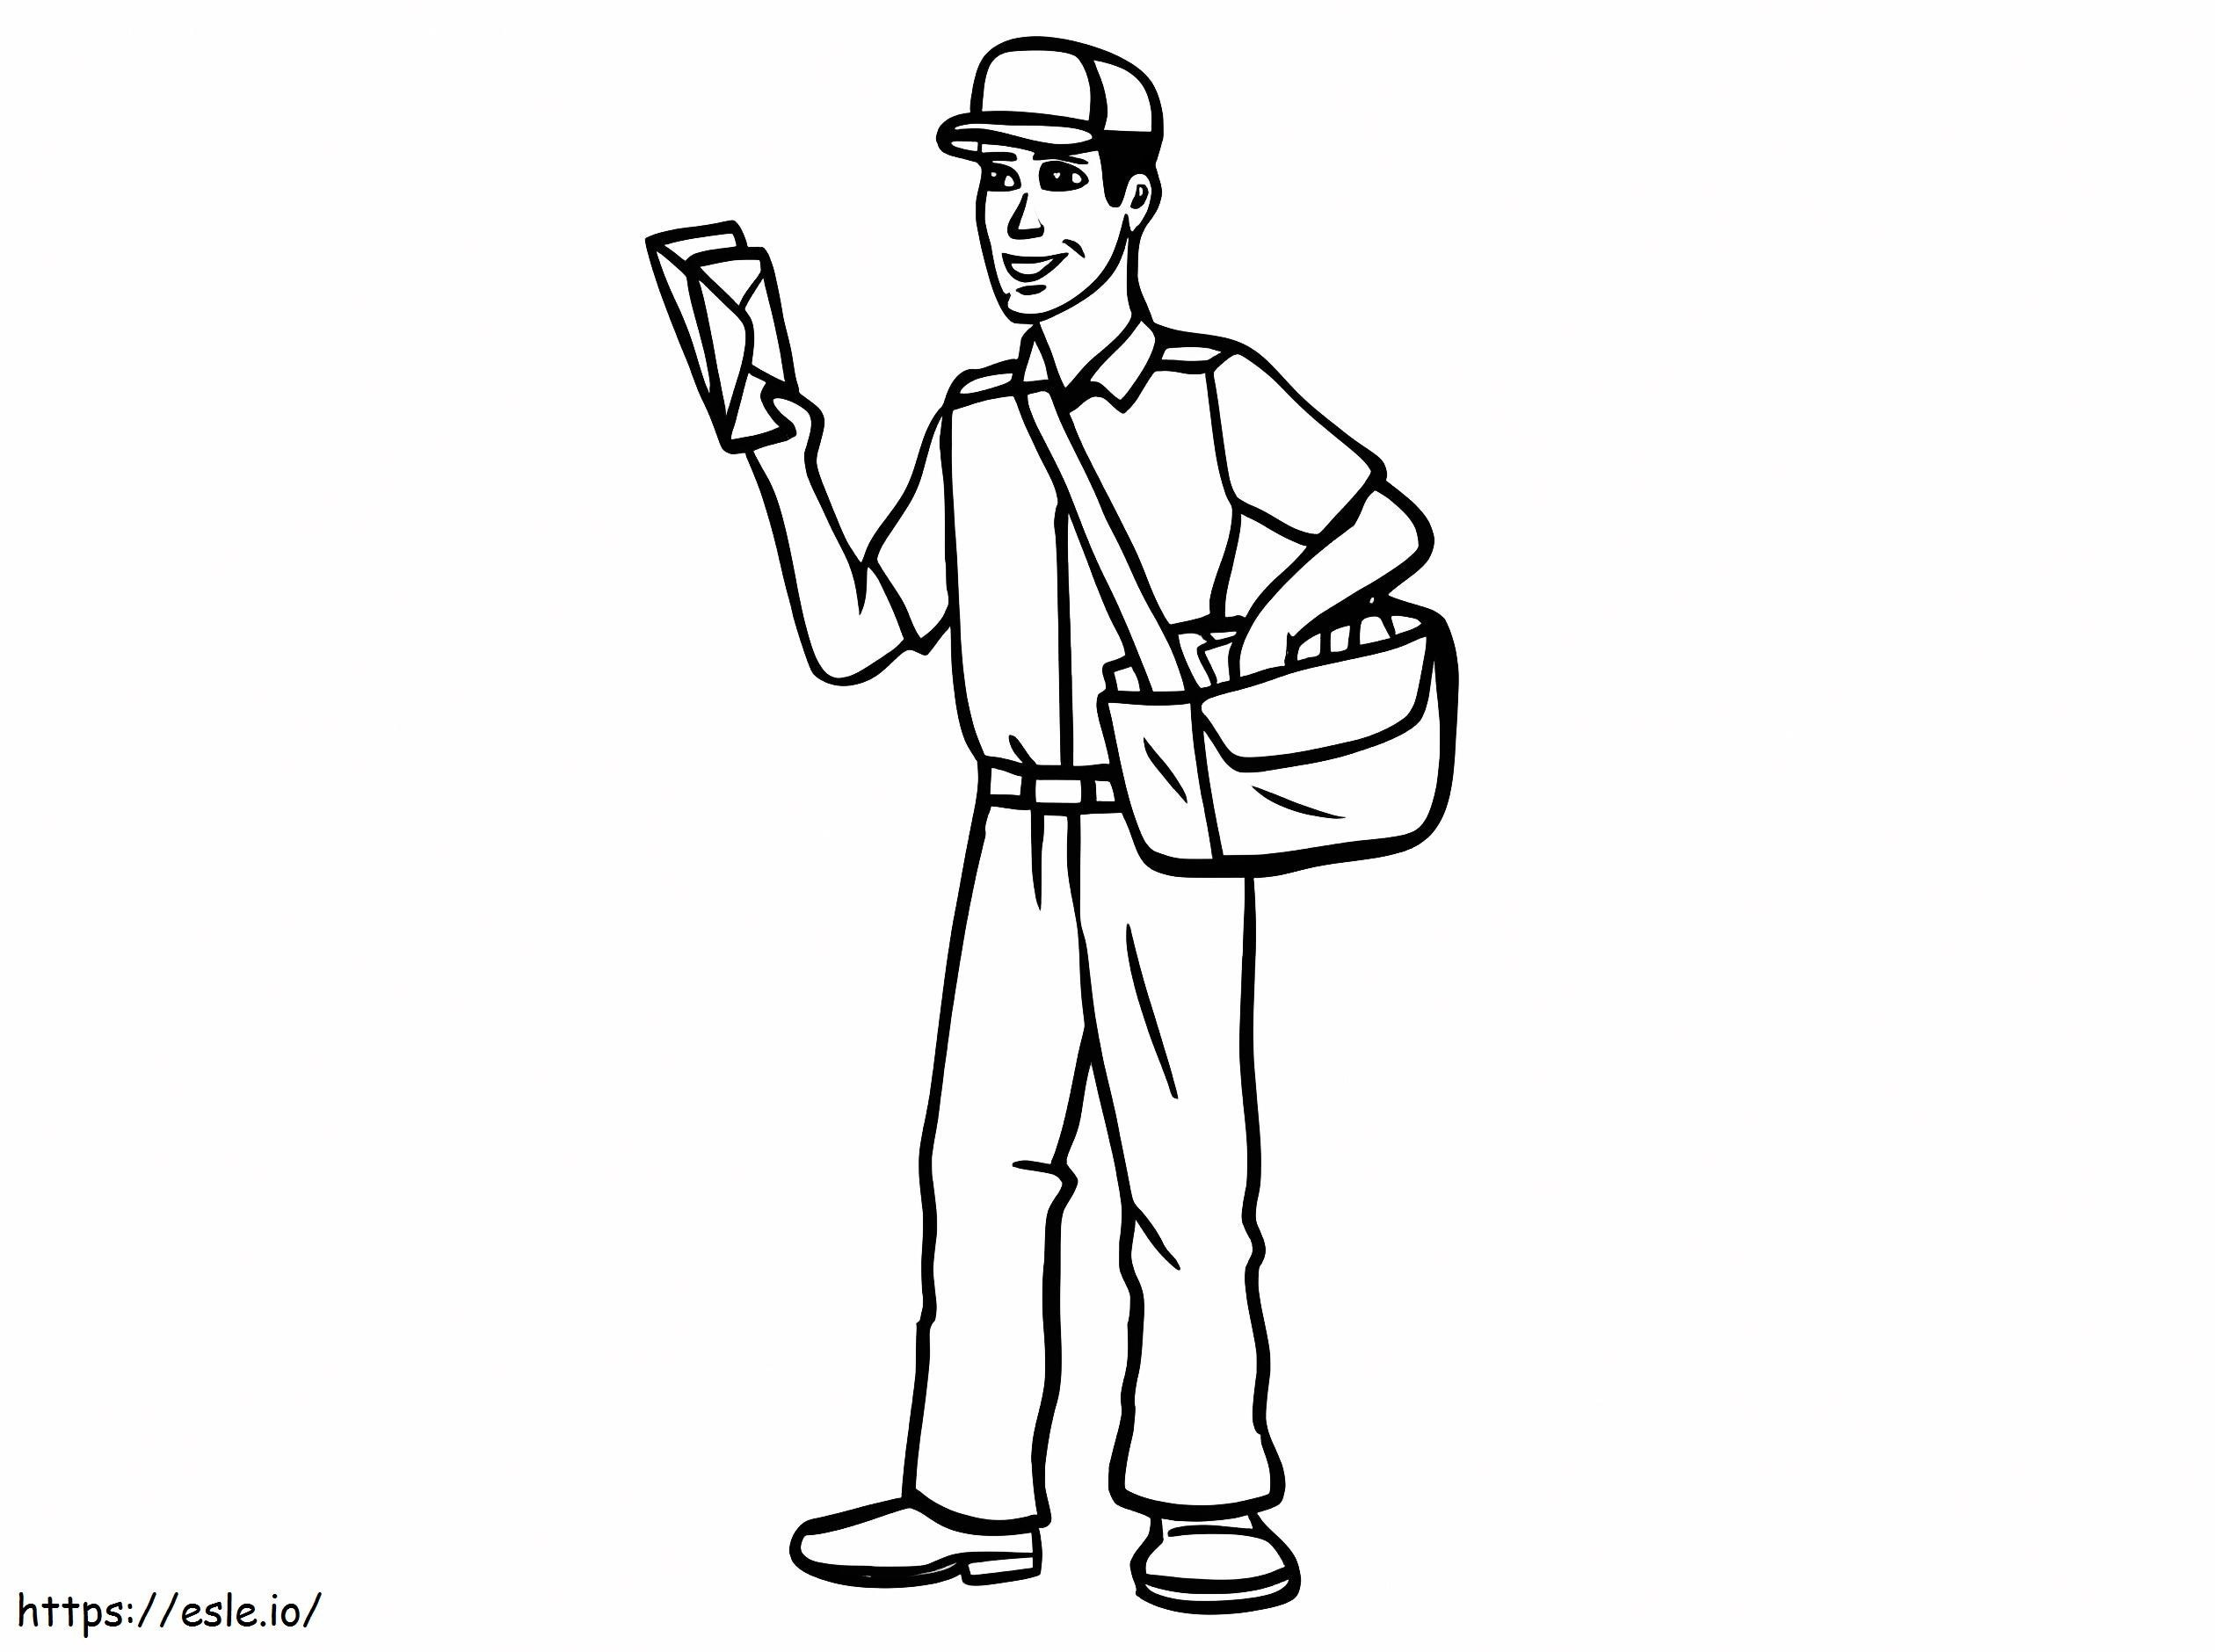 Normal Postman coloring page